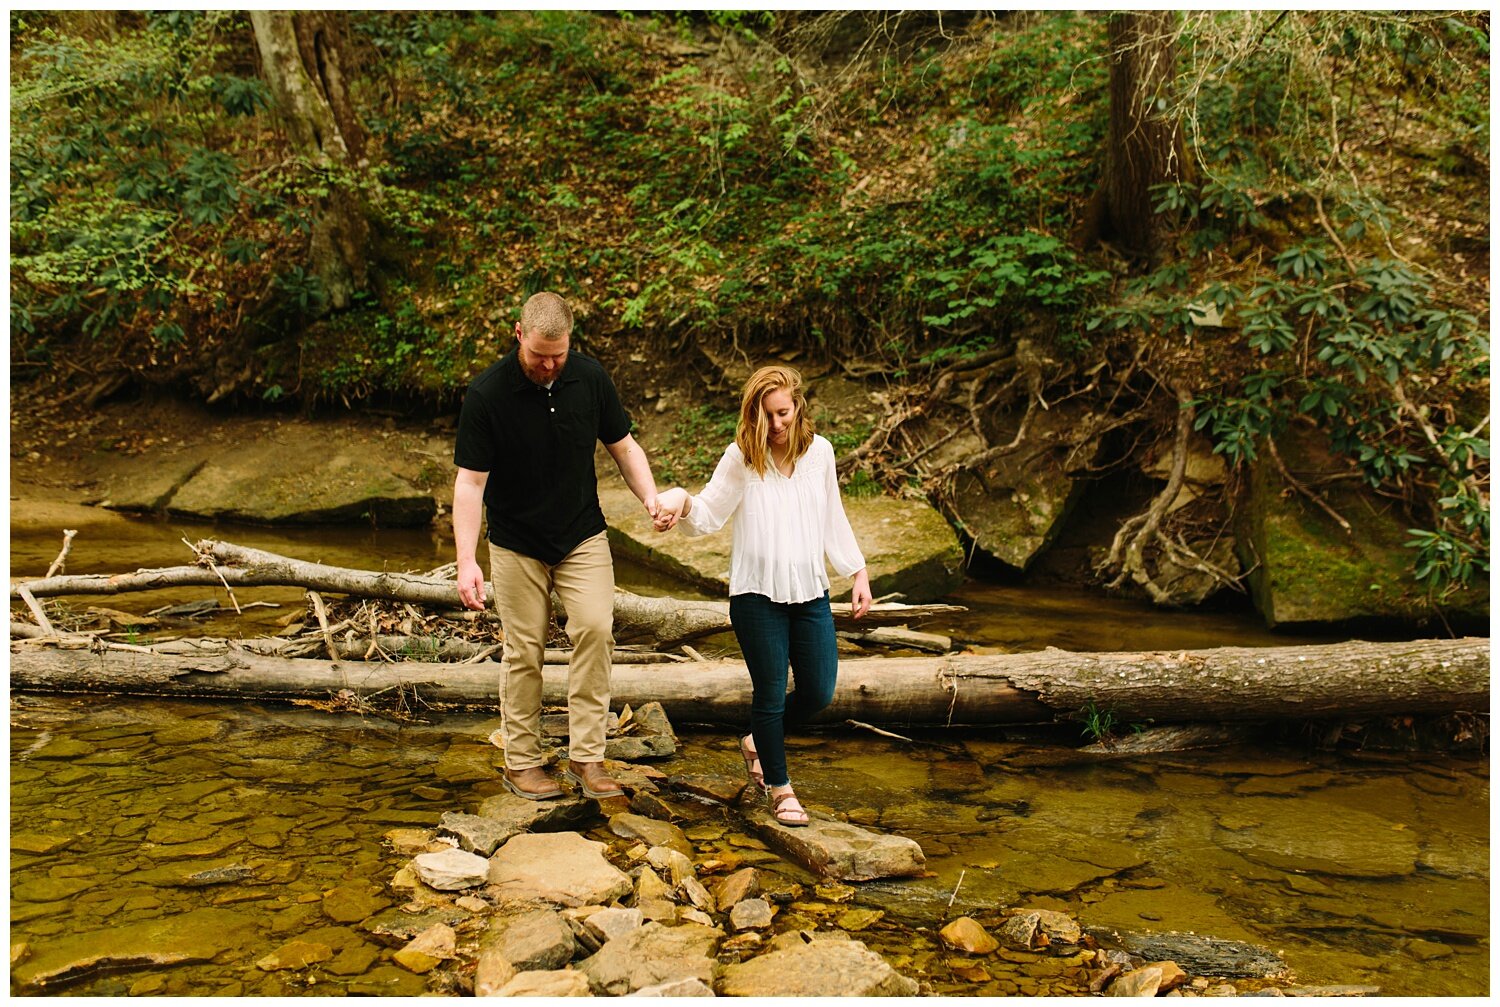 Kendra_Farris_Photography_Red_River_Gorge_Engagement_Photos-40.jpg